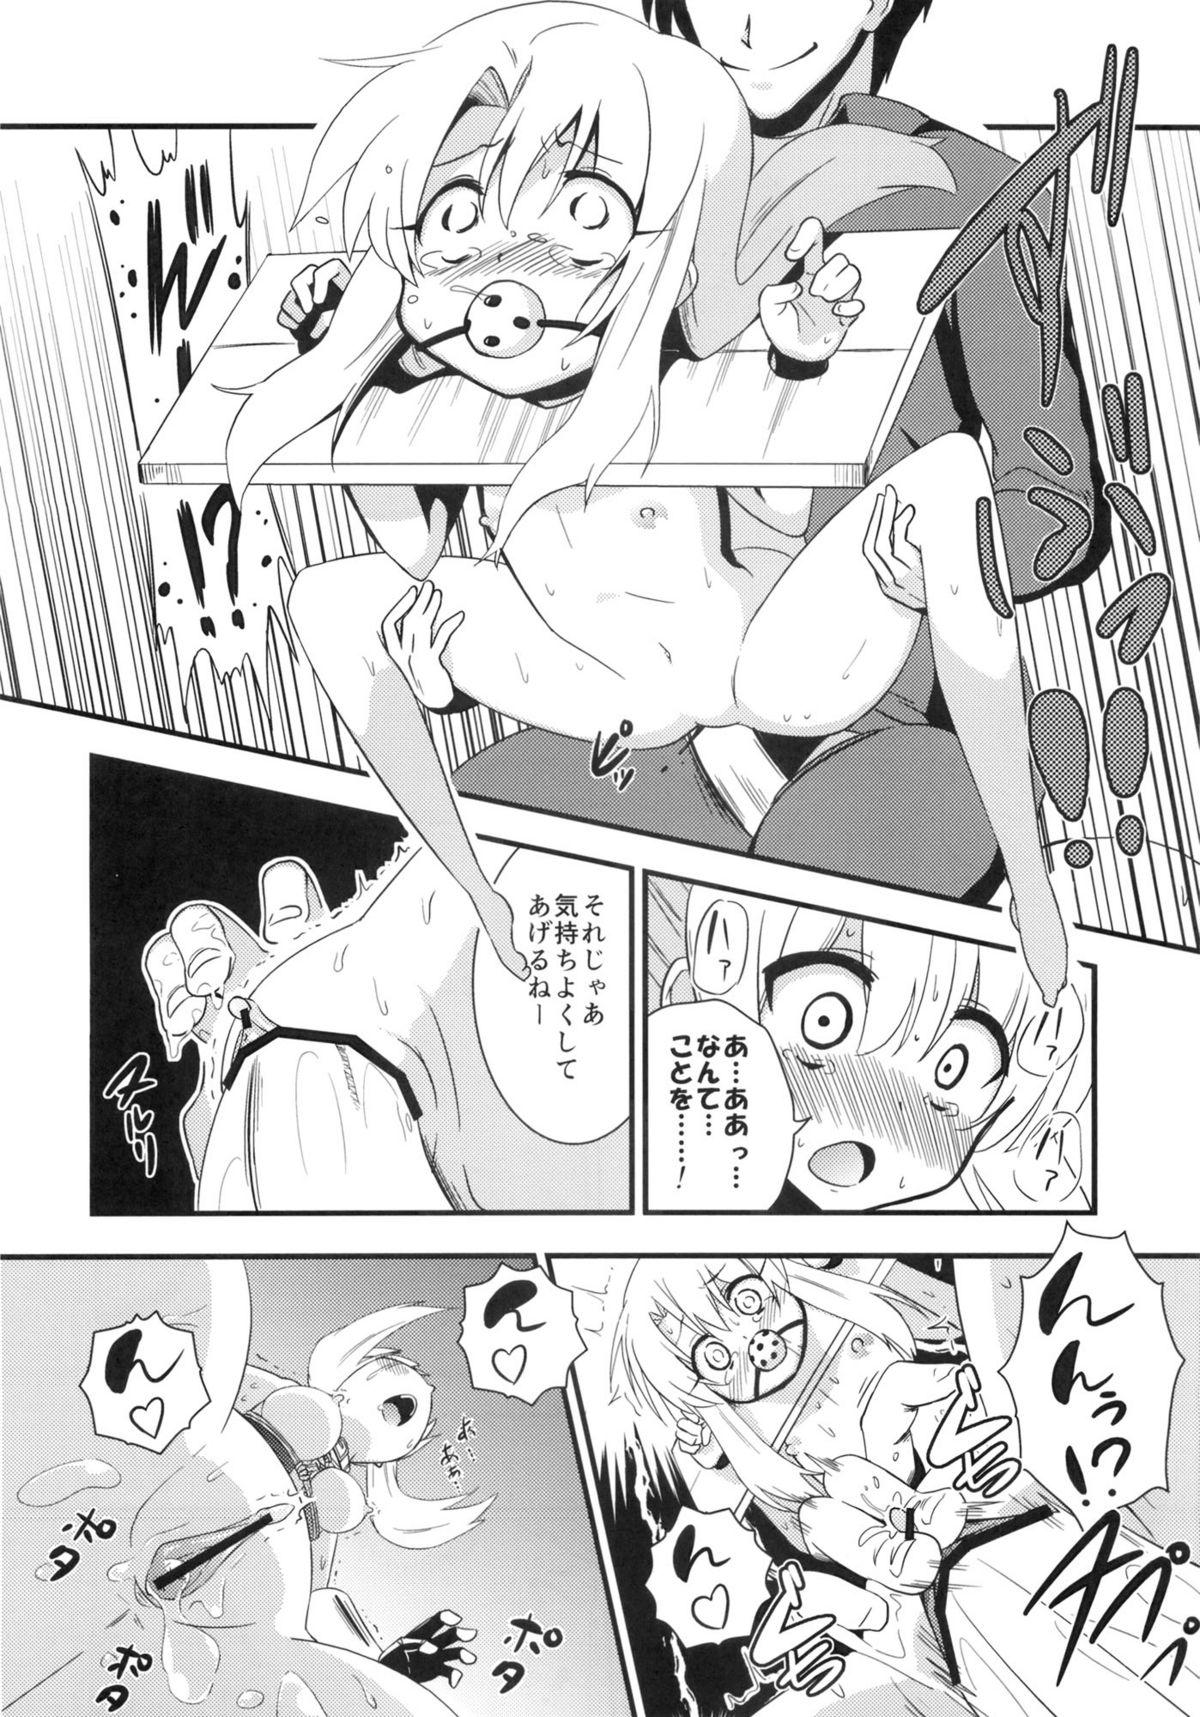 Perfect Pussy D no Kishiou II - Fate stay night Fate zero With - Page 7